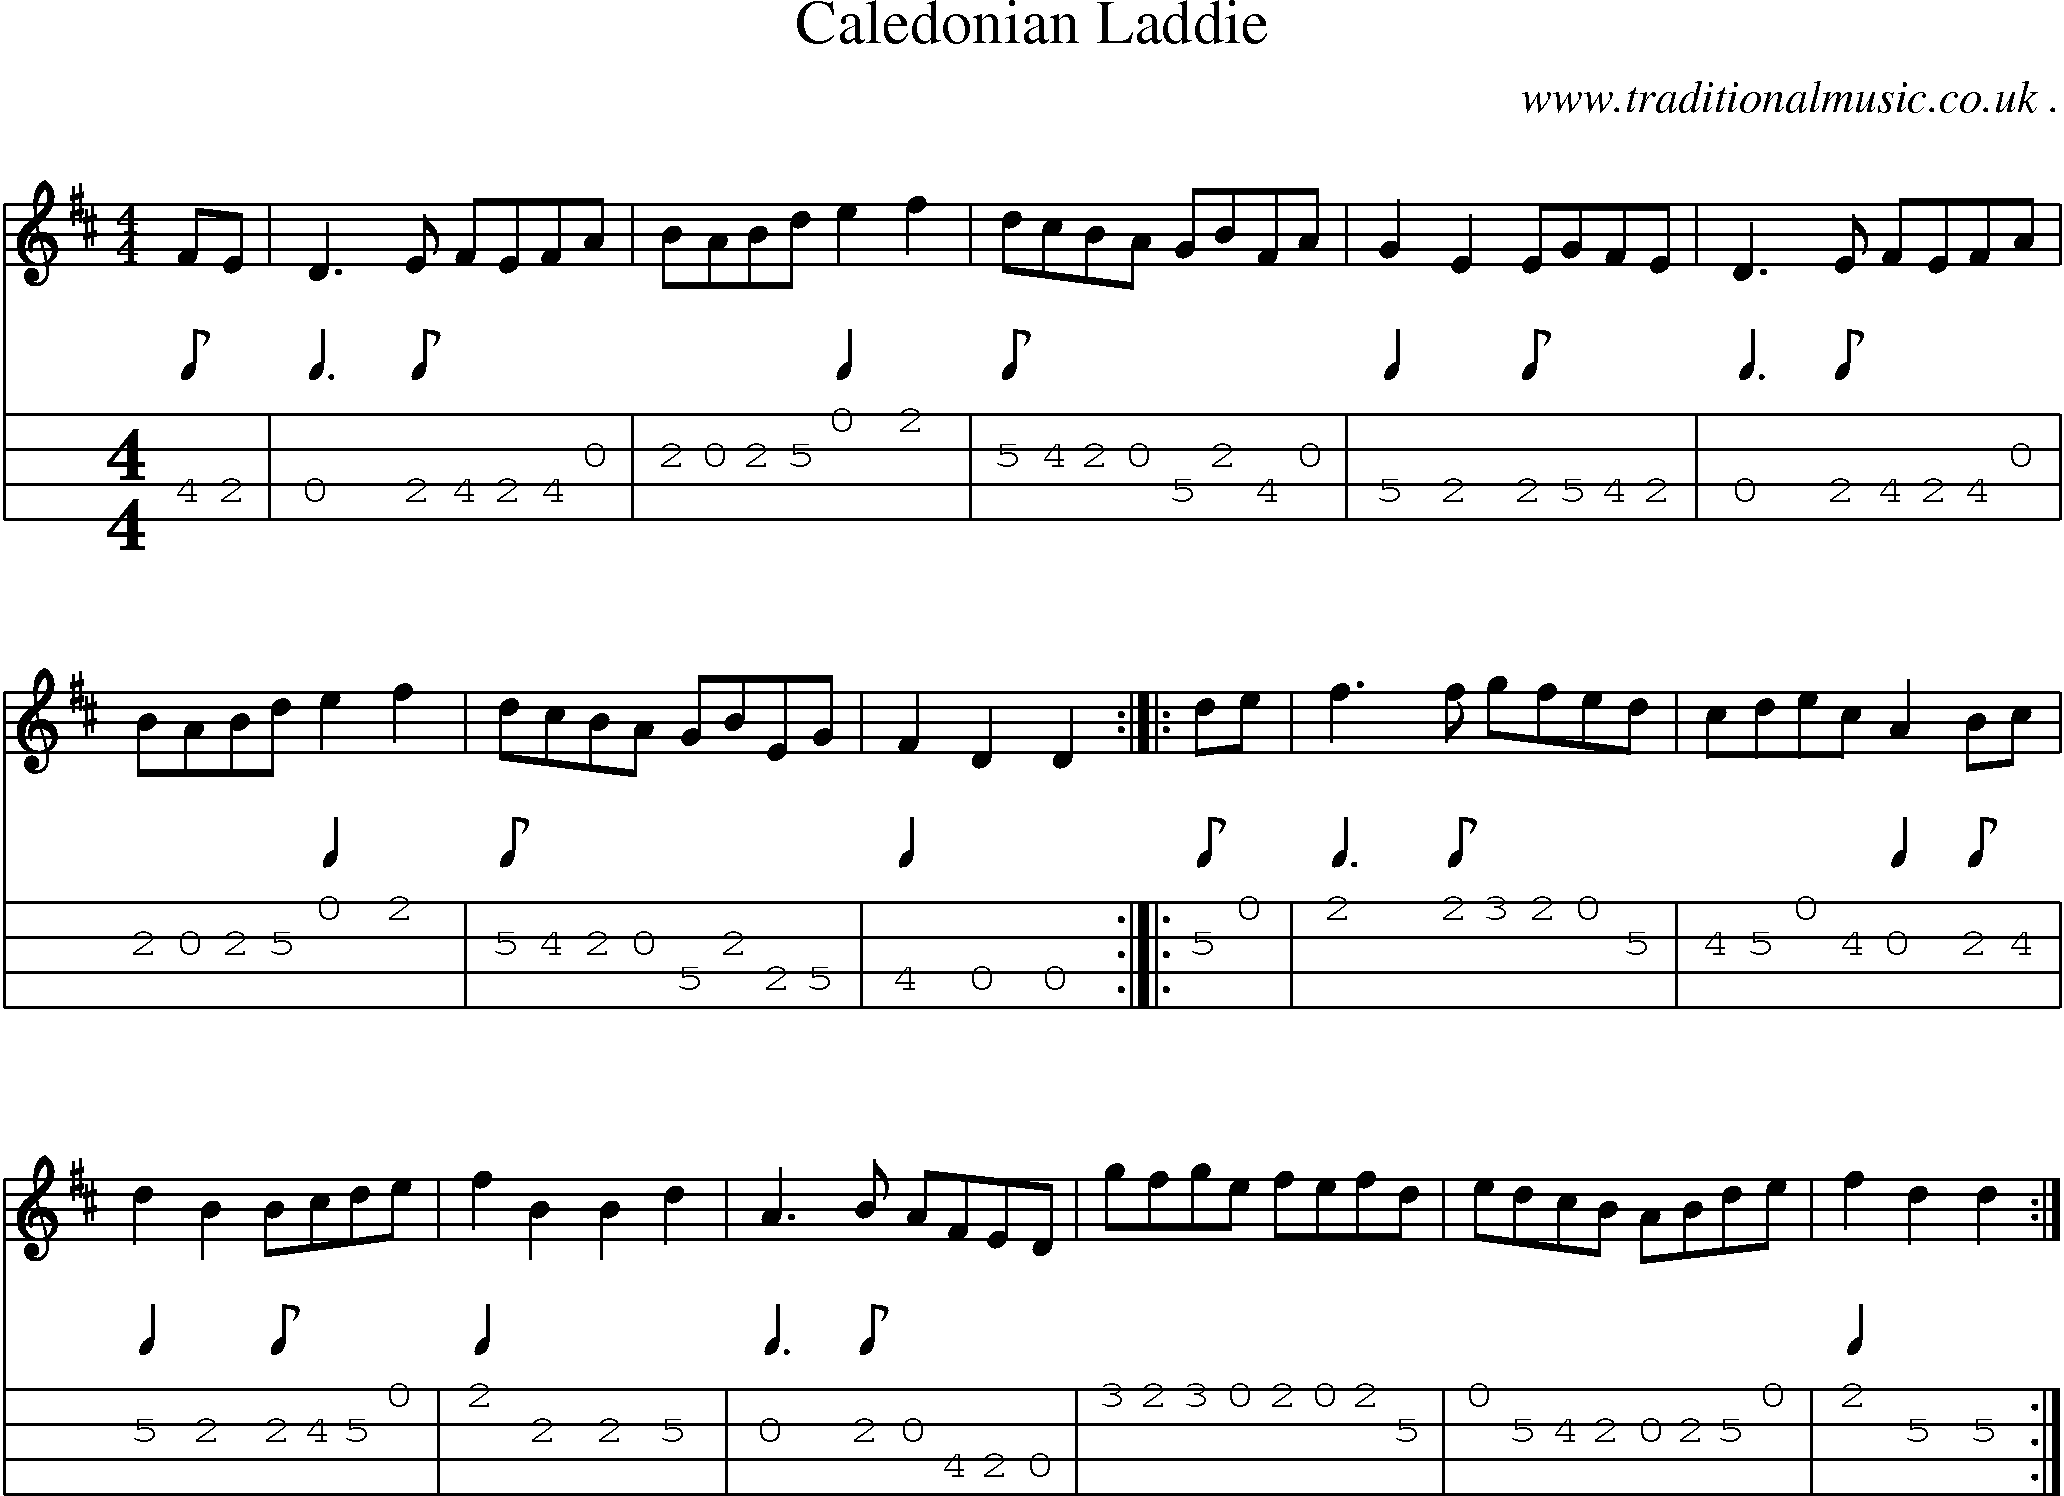 Sheet-music  score, Chords and Mandolin Tabs for Caledonian Laddie